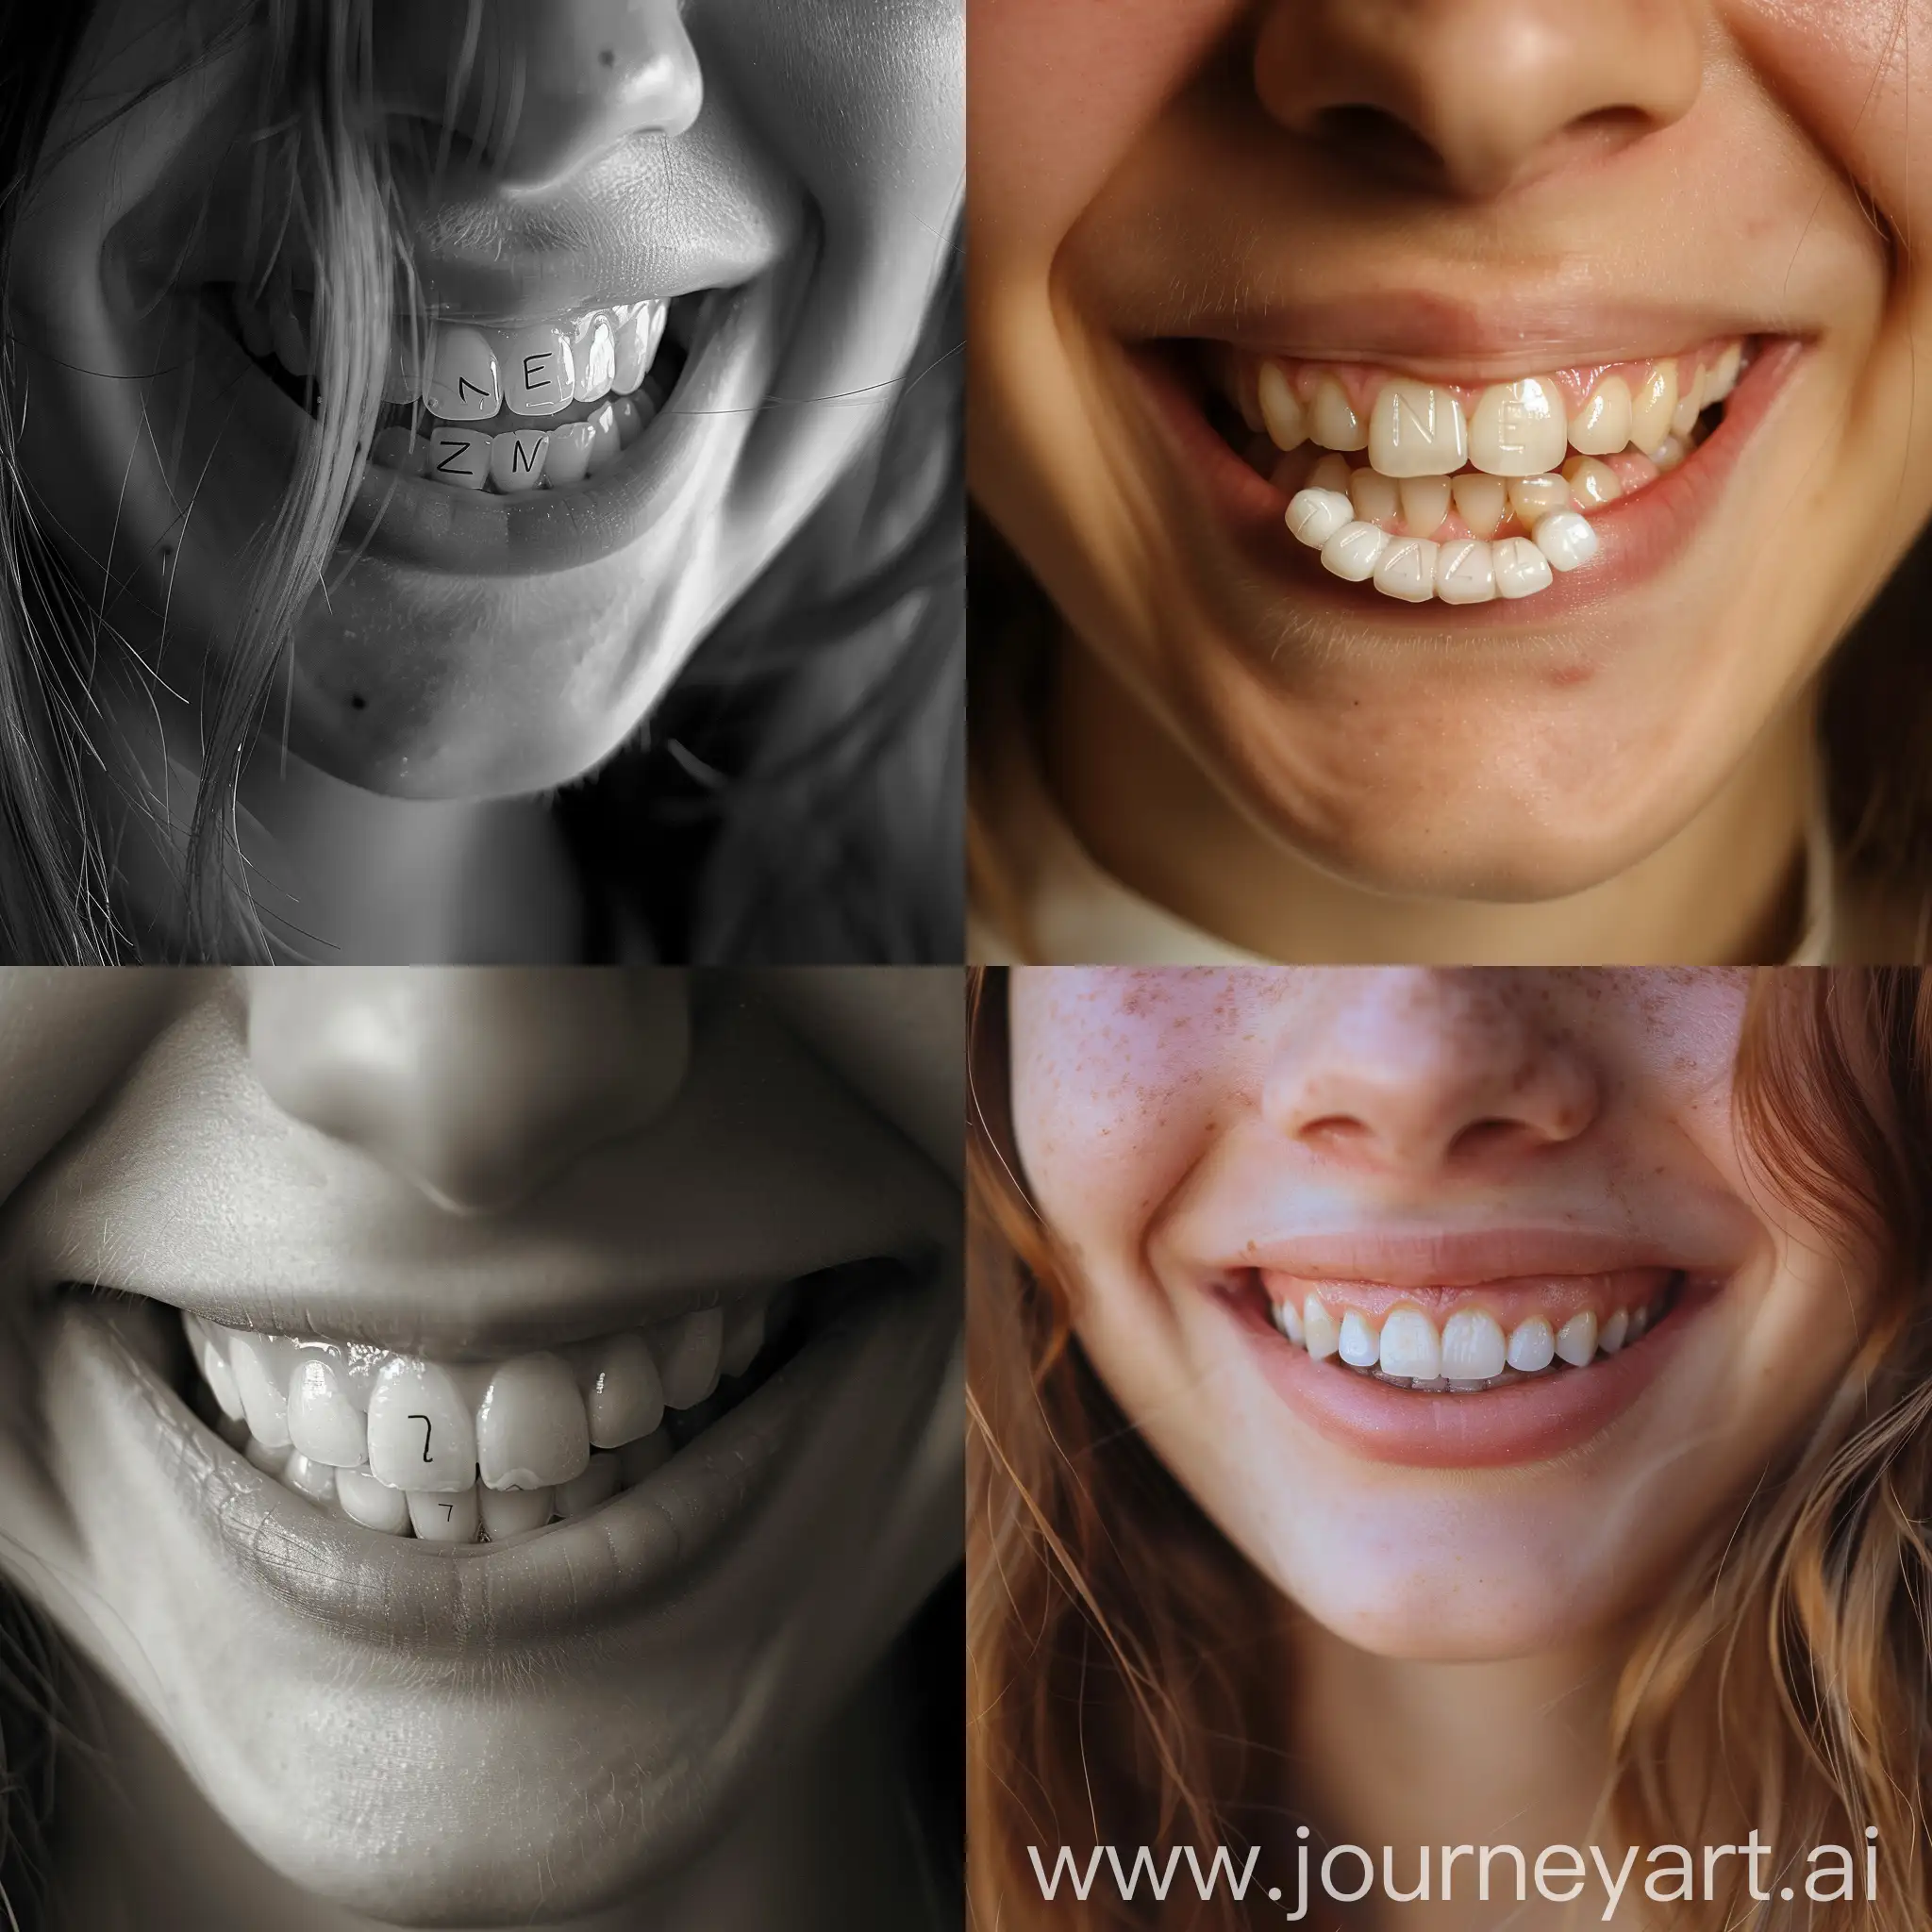 Young-Woman-Smiling-with-Custom-Letter-Teeth-CloseUp-Portrait